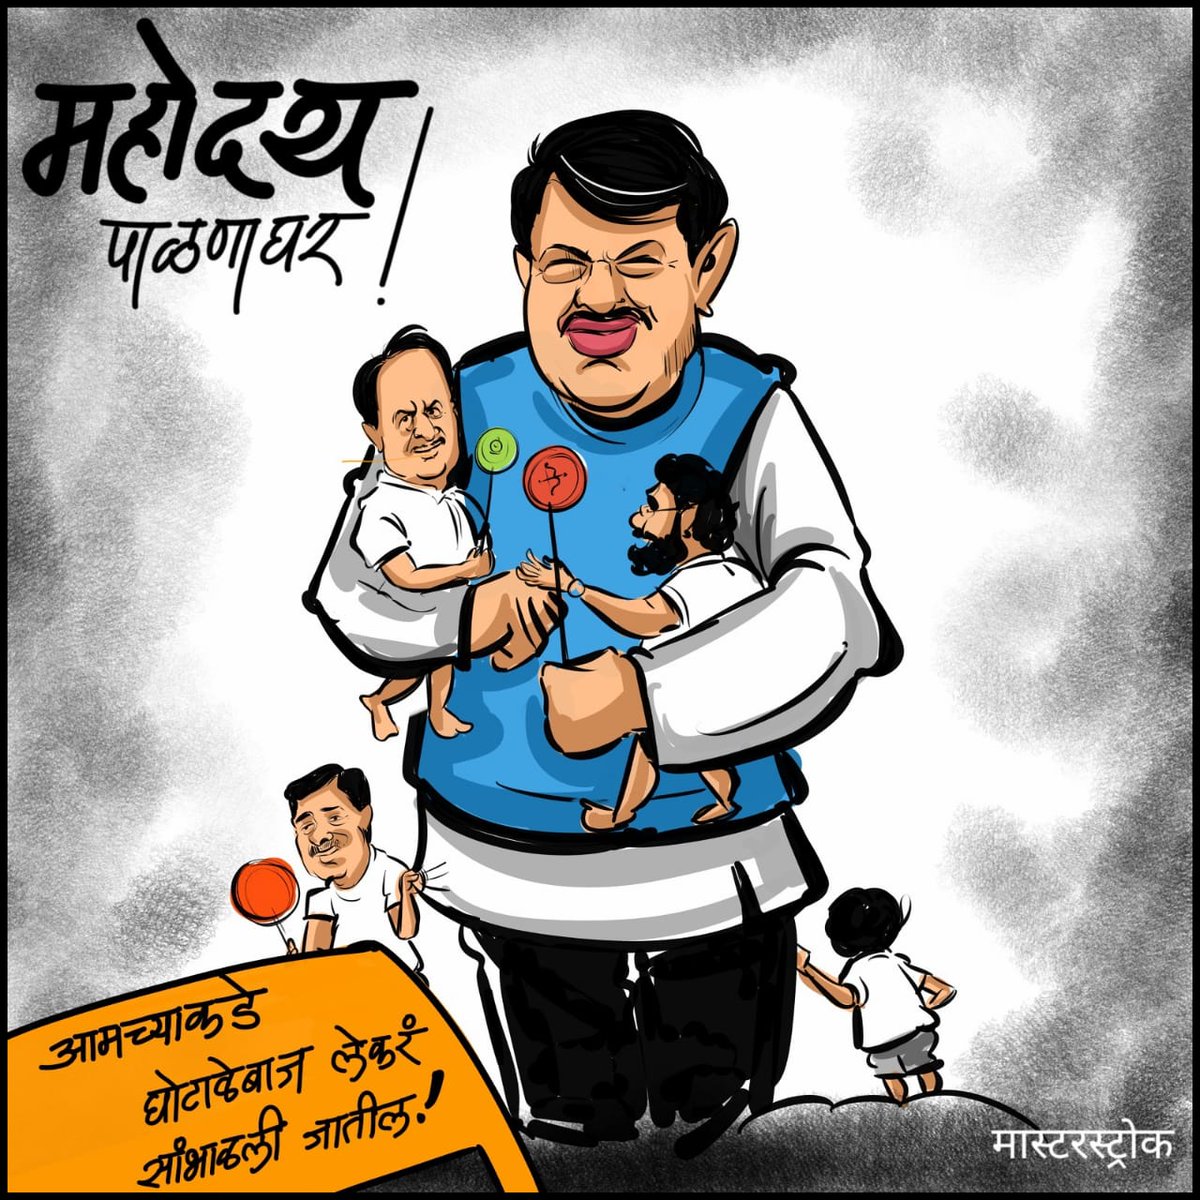 Every citizen of our state today would be able to relate to this cartoon....!!! #पाळणाघर #महाराष्ट्र #MaharashtraPolitics